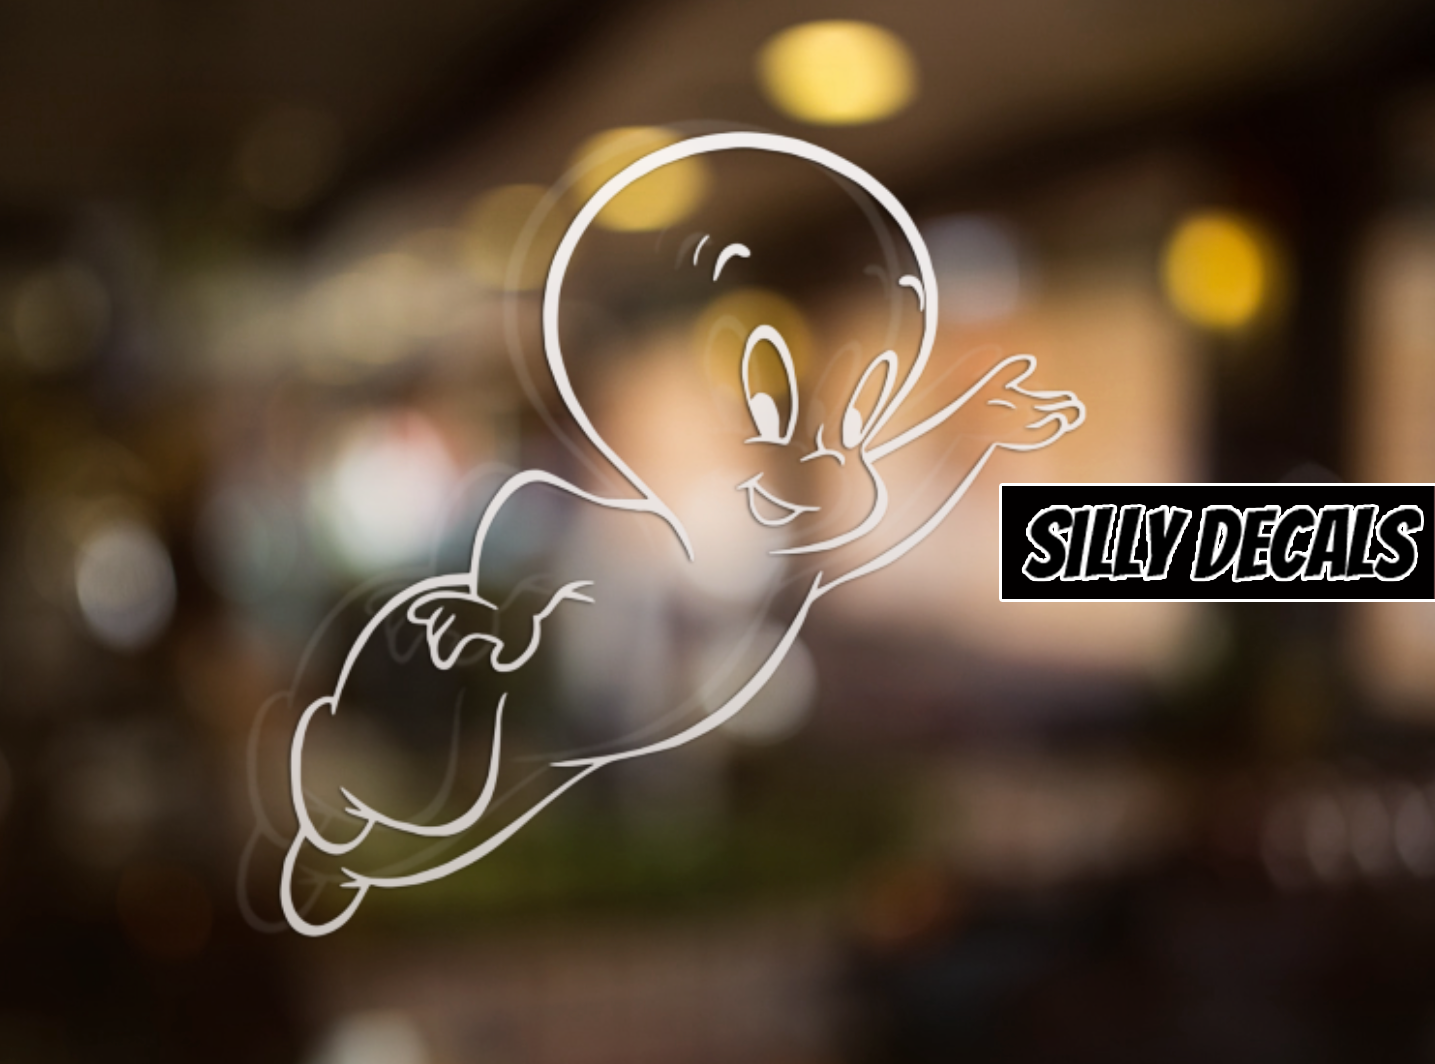 Happy Ghost; Spooky Halloween Vinyl Decals Suitable For Cars, Windows, Walls, and More!